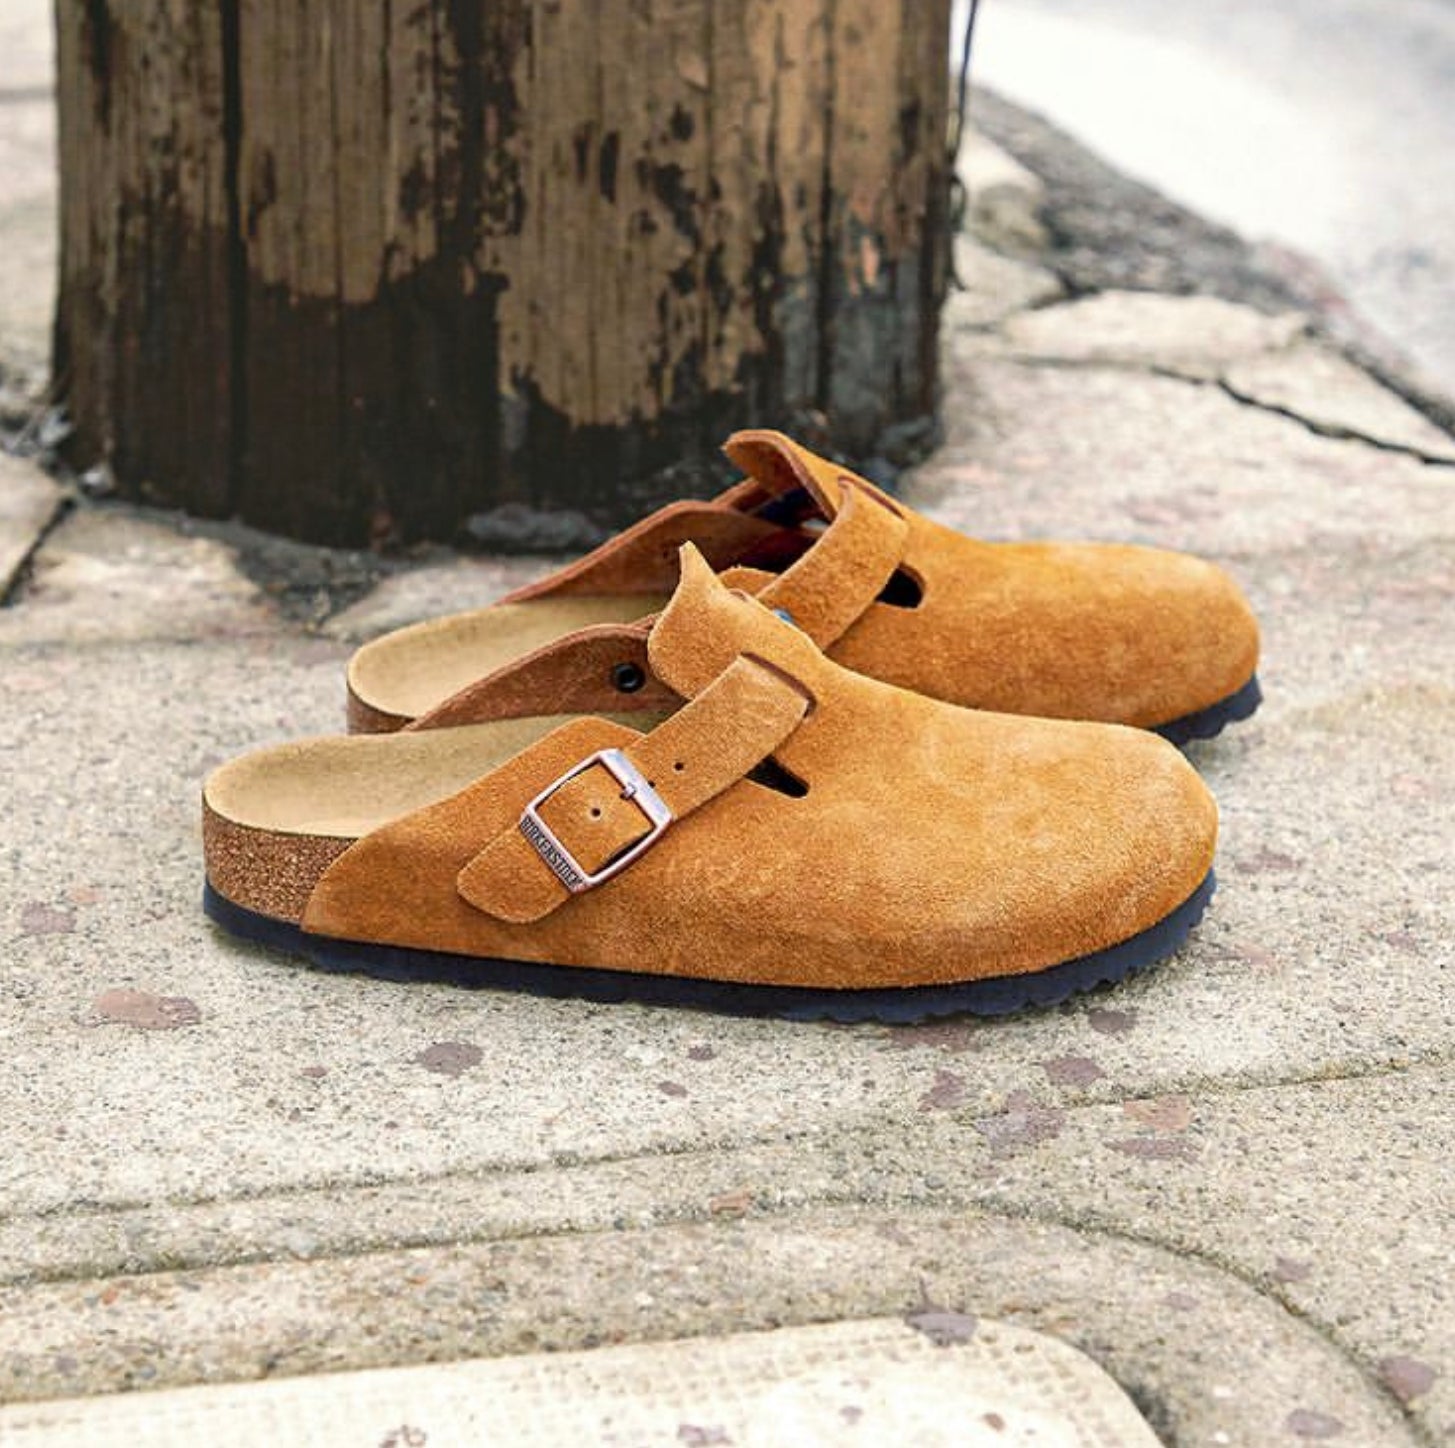 Boston Suede Leather - Mink Soft Footbed